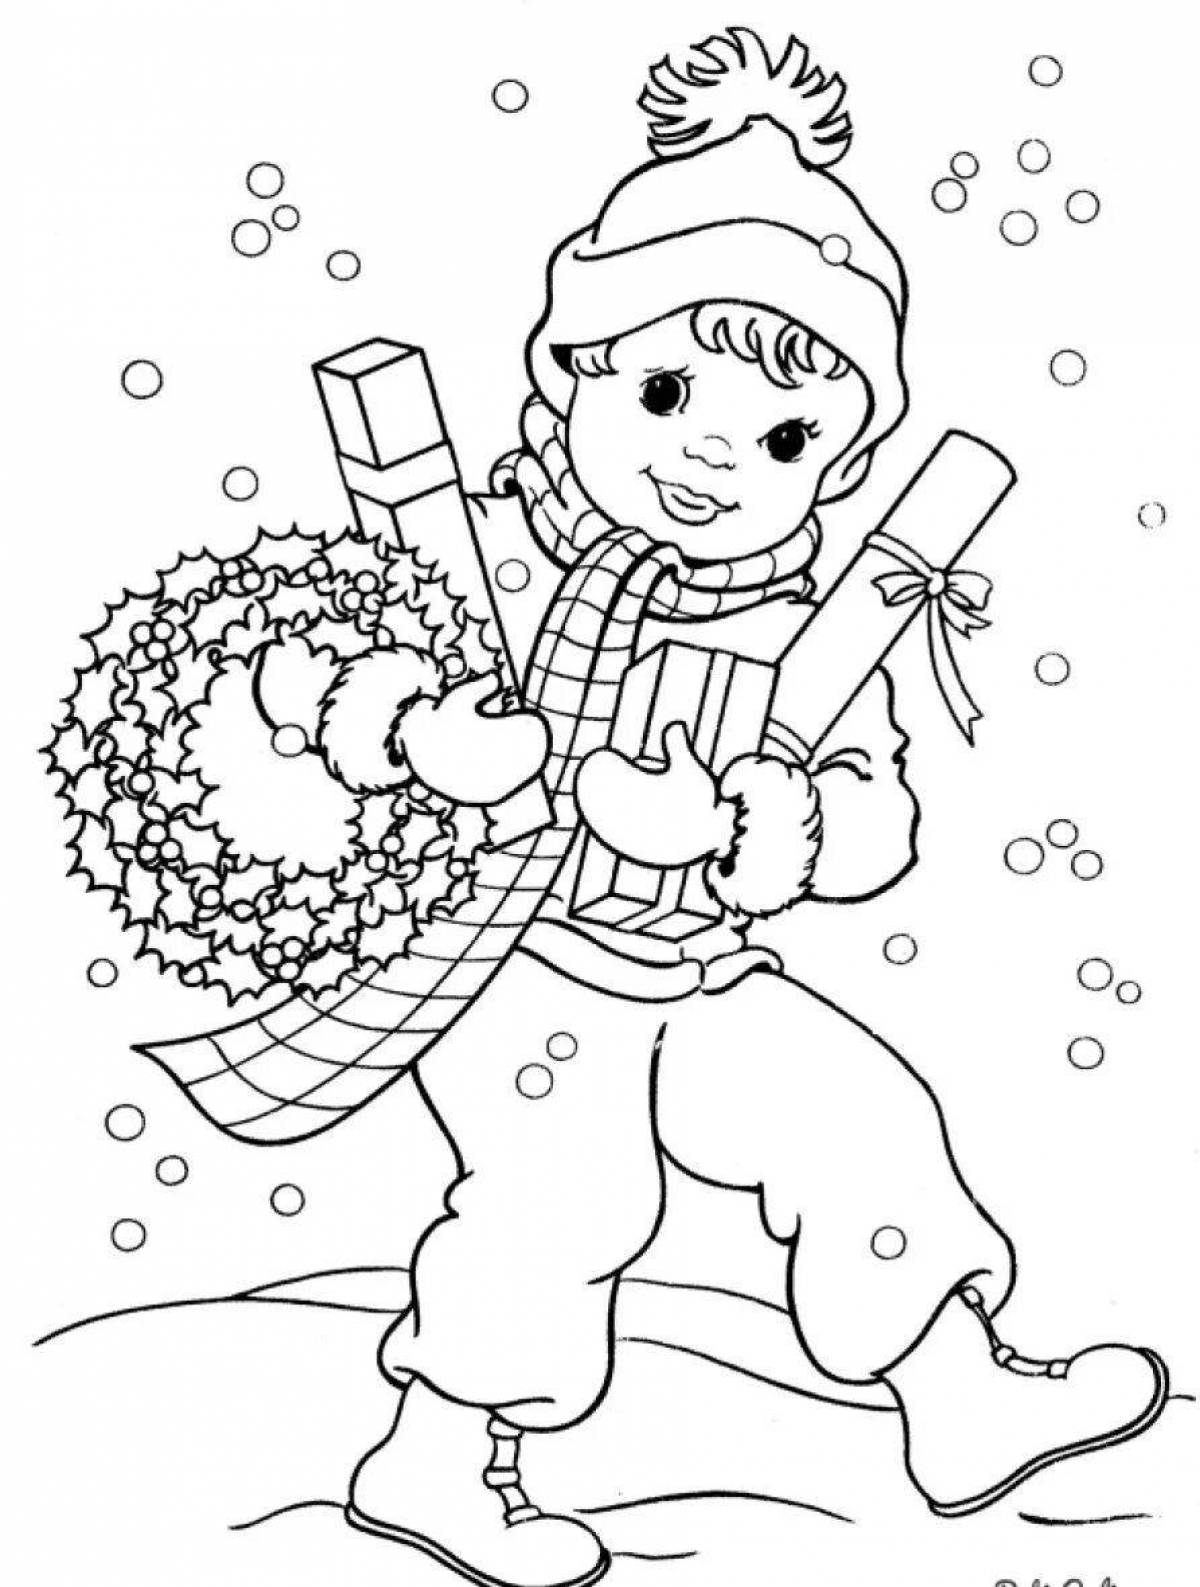 Outlandish Christmas coloring book for boys